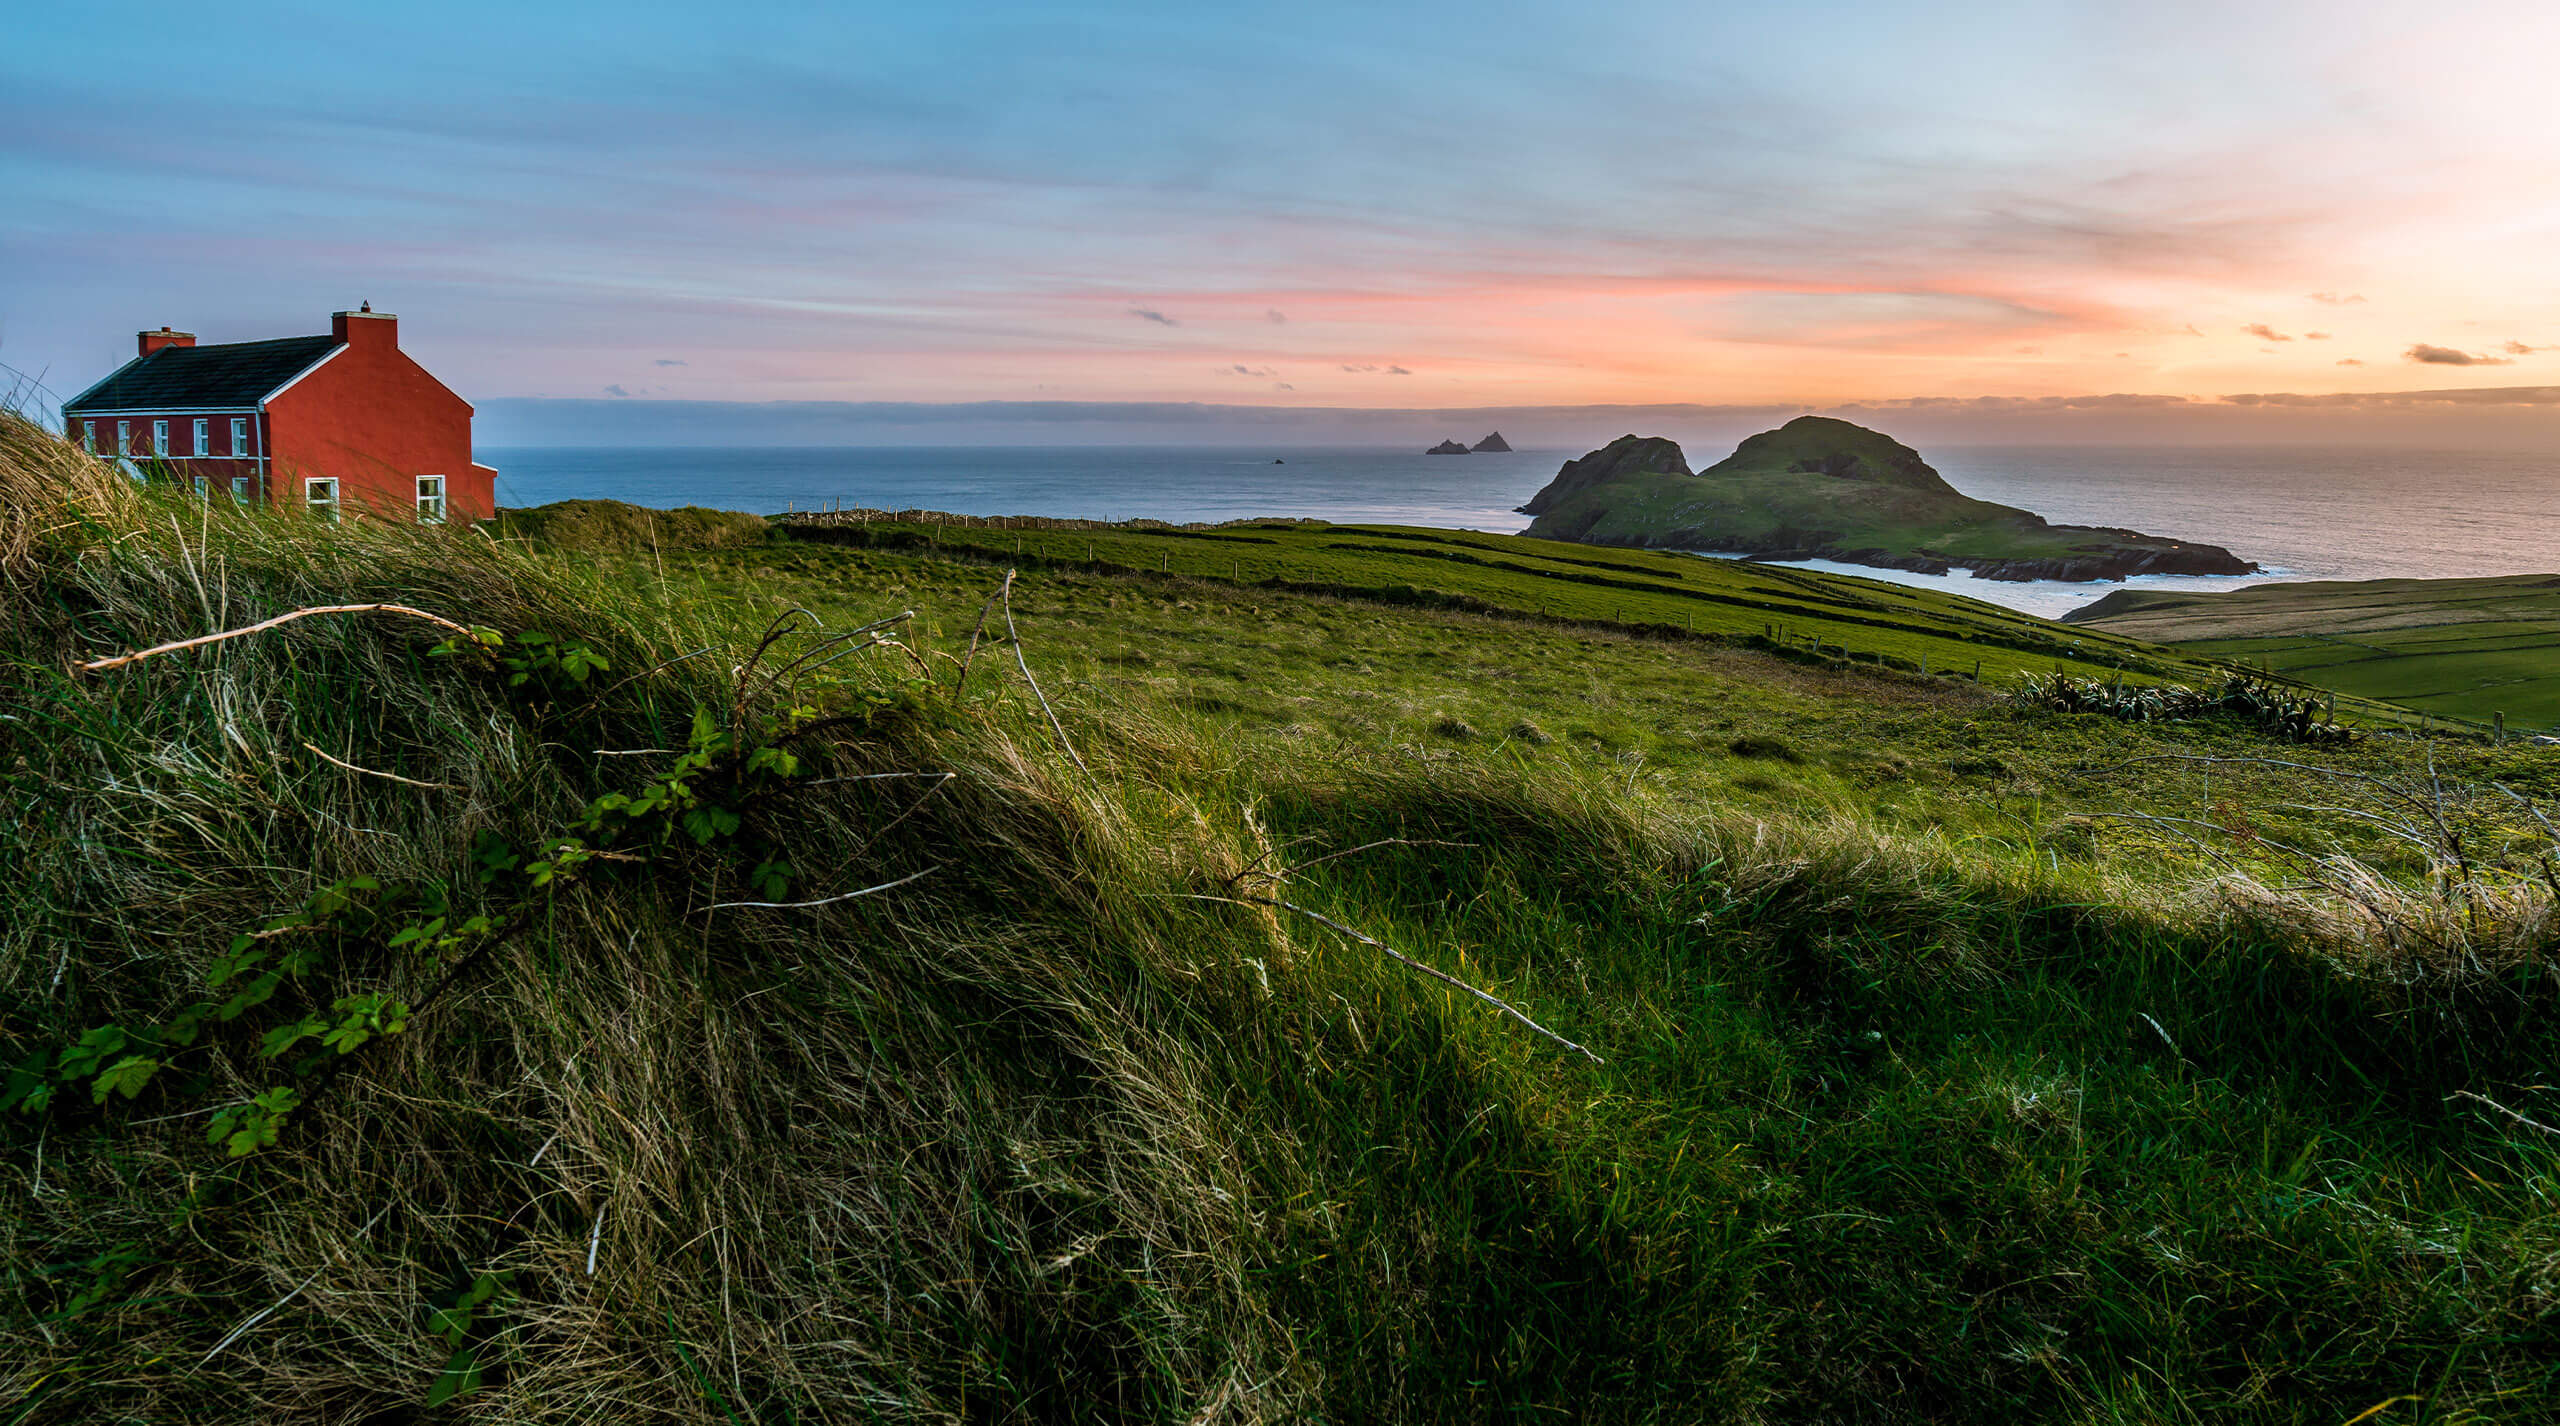 Secluded and self-contained holiday homes in Ireland; scenic view from Skellig Ring